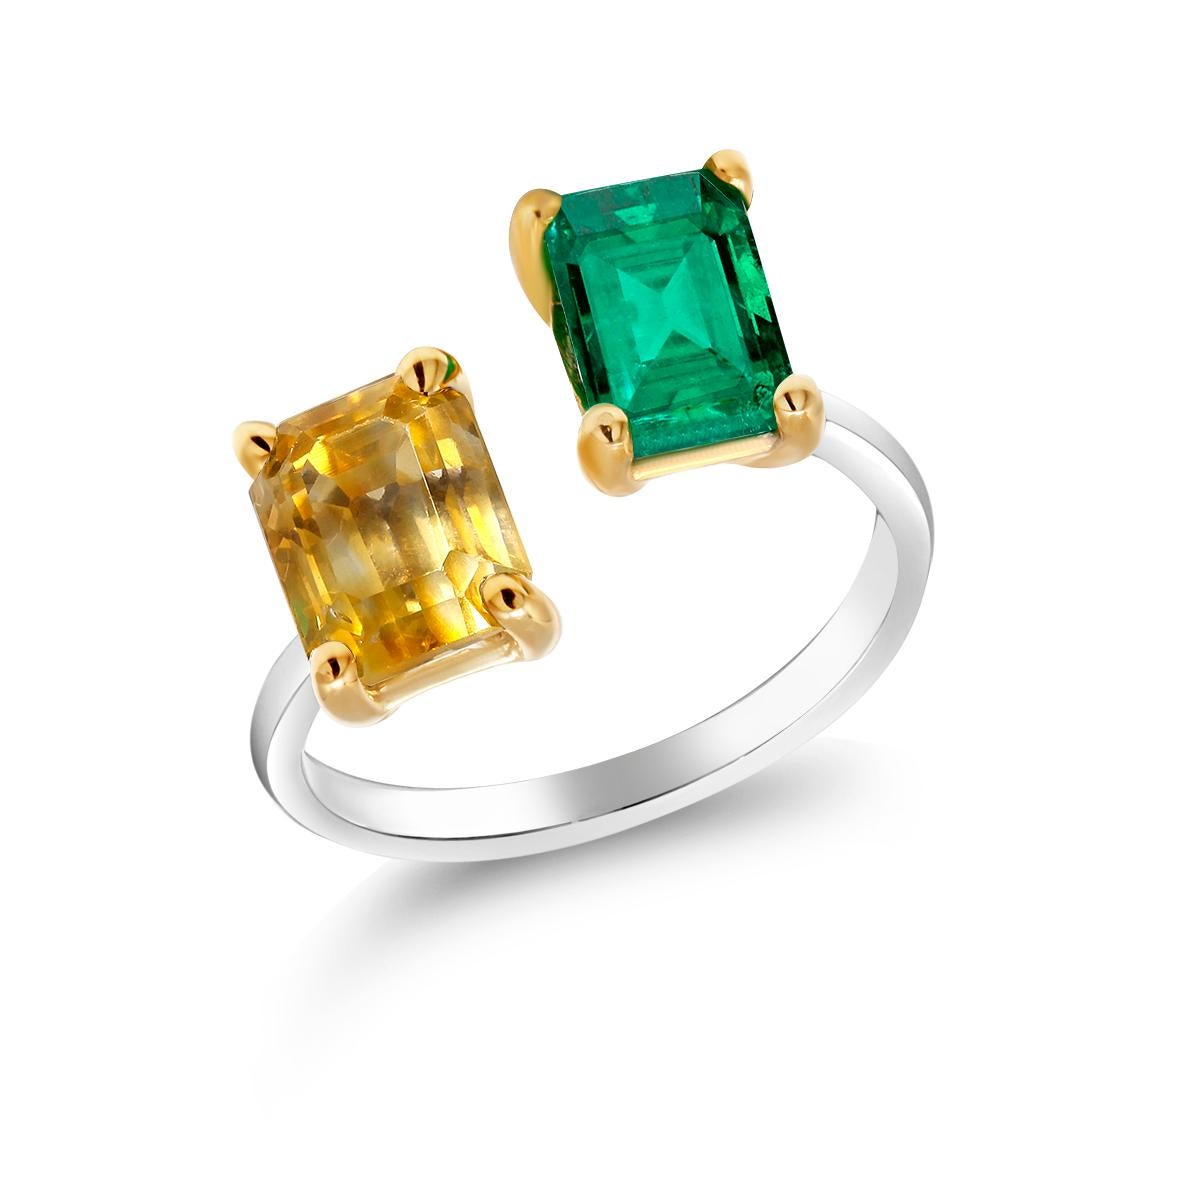 Contemporary Open Band with Facing EC Emerald and EC Yellow Sapphire Cocktail Ring 